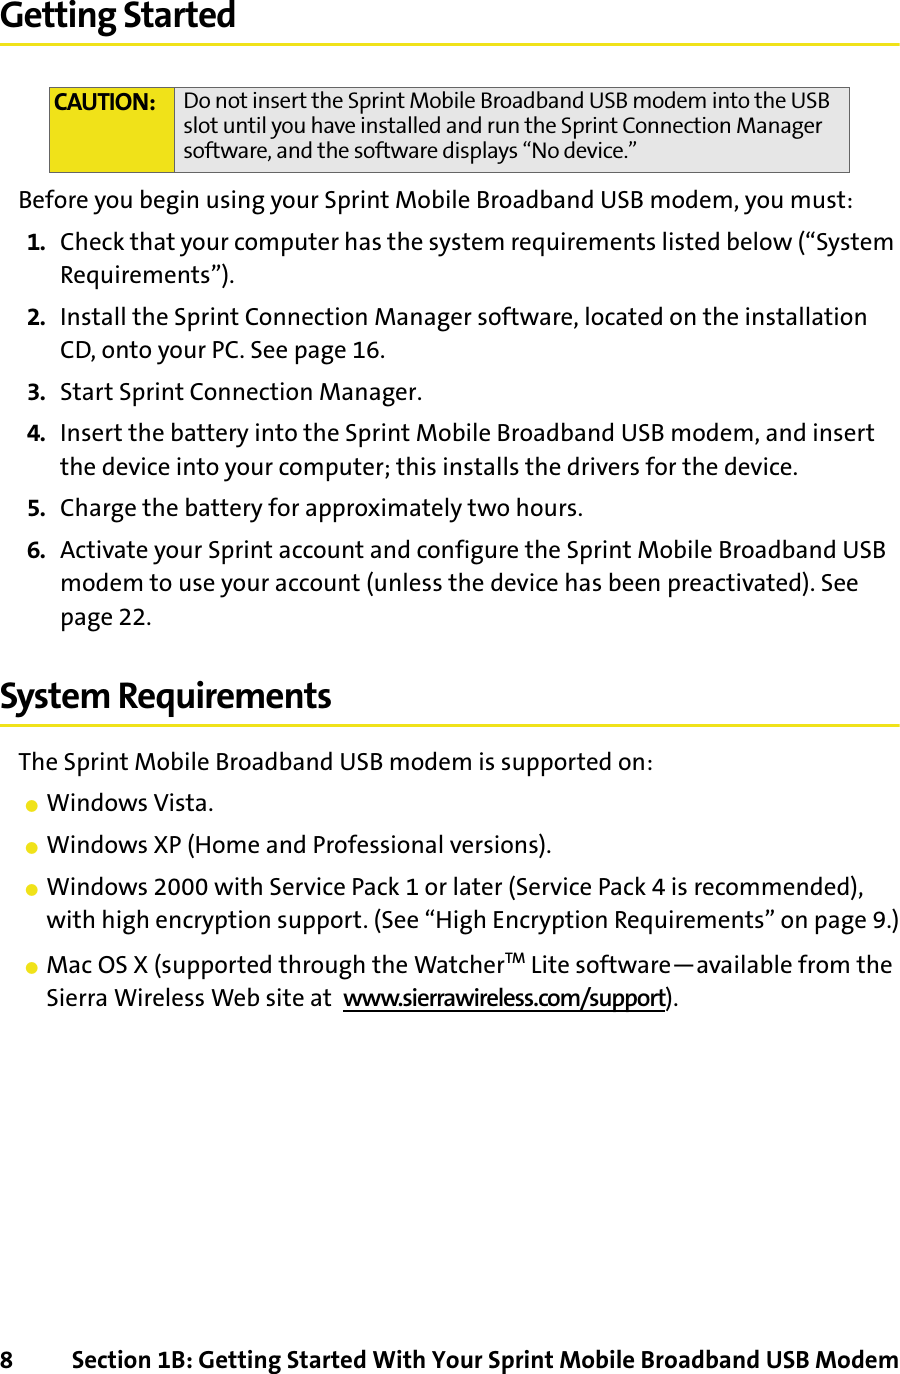 8 Section 1B: Getting Started With Your Sprint Mobile Broadband USB ModemGetting StartedBefore you begin using your Sprint Mobile Broadband USB modem, you must:1. Check that your computer has the system requirements listed below (“System Requirements”).2. Install the Sprint Connection Manager software, located on the installation CD, onto your PC. See page 16.3. Start Sprint Connection Manager.4. Insert the battery into the Sprint Mobile Broadband USB modem, and insert the device into your computer; this installs the drivers for the device.5. Charge the battery for approximately two hours.6. Activate your Sprint account and configure the Sprint Mobile Broadband USB modem to use your account (unless the device has been preactivated). See page 22.System RequirementsThe Sprint Mobile Broadband USB modem is supported on:䢇Windows Vista.䢇Windows XP (Home and Professional versions).䢇Windows 2000 with Service Pack 1 or later (Service Pack 4 is recommended), with high encryption support. (See “High Encryption Requirements” on page 9.)䢇Mac OS X (supported through the WatcherTM Lite software—available from the Sierra Wireless Web site at  www.sierrawireless.com/support).CAUTION: Do not insert the Sprint Mobile Broadband USB modem into the USB slot until you have installed and run the Sprint Connection Manager software, and the software displays “No device.”